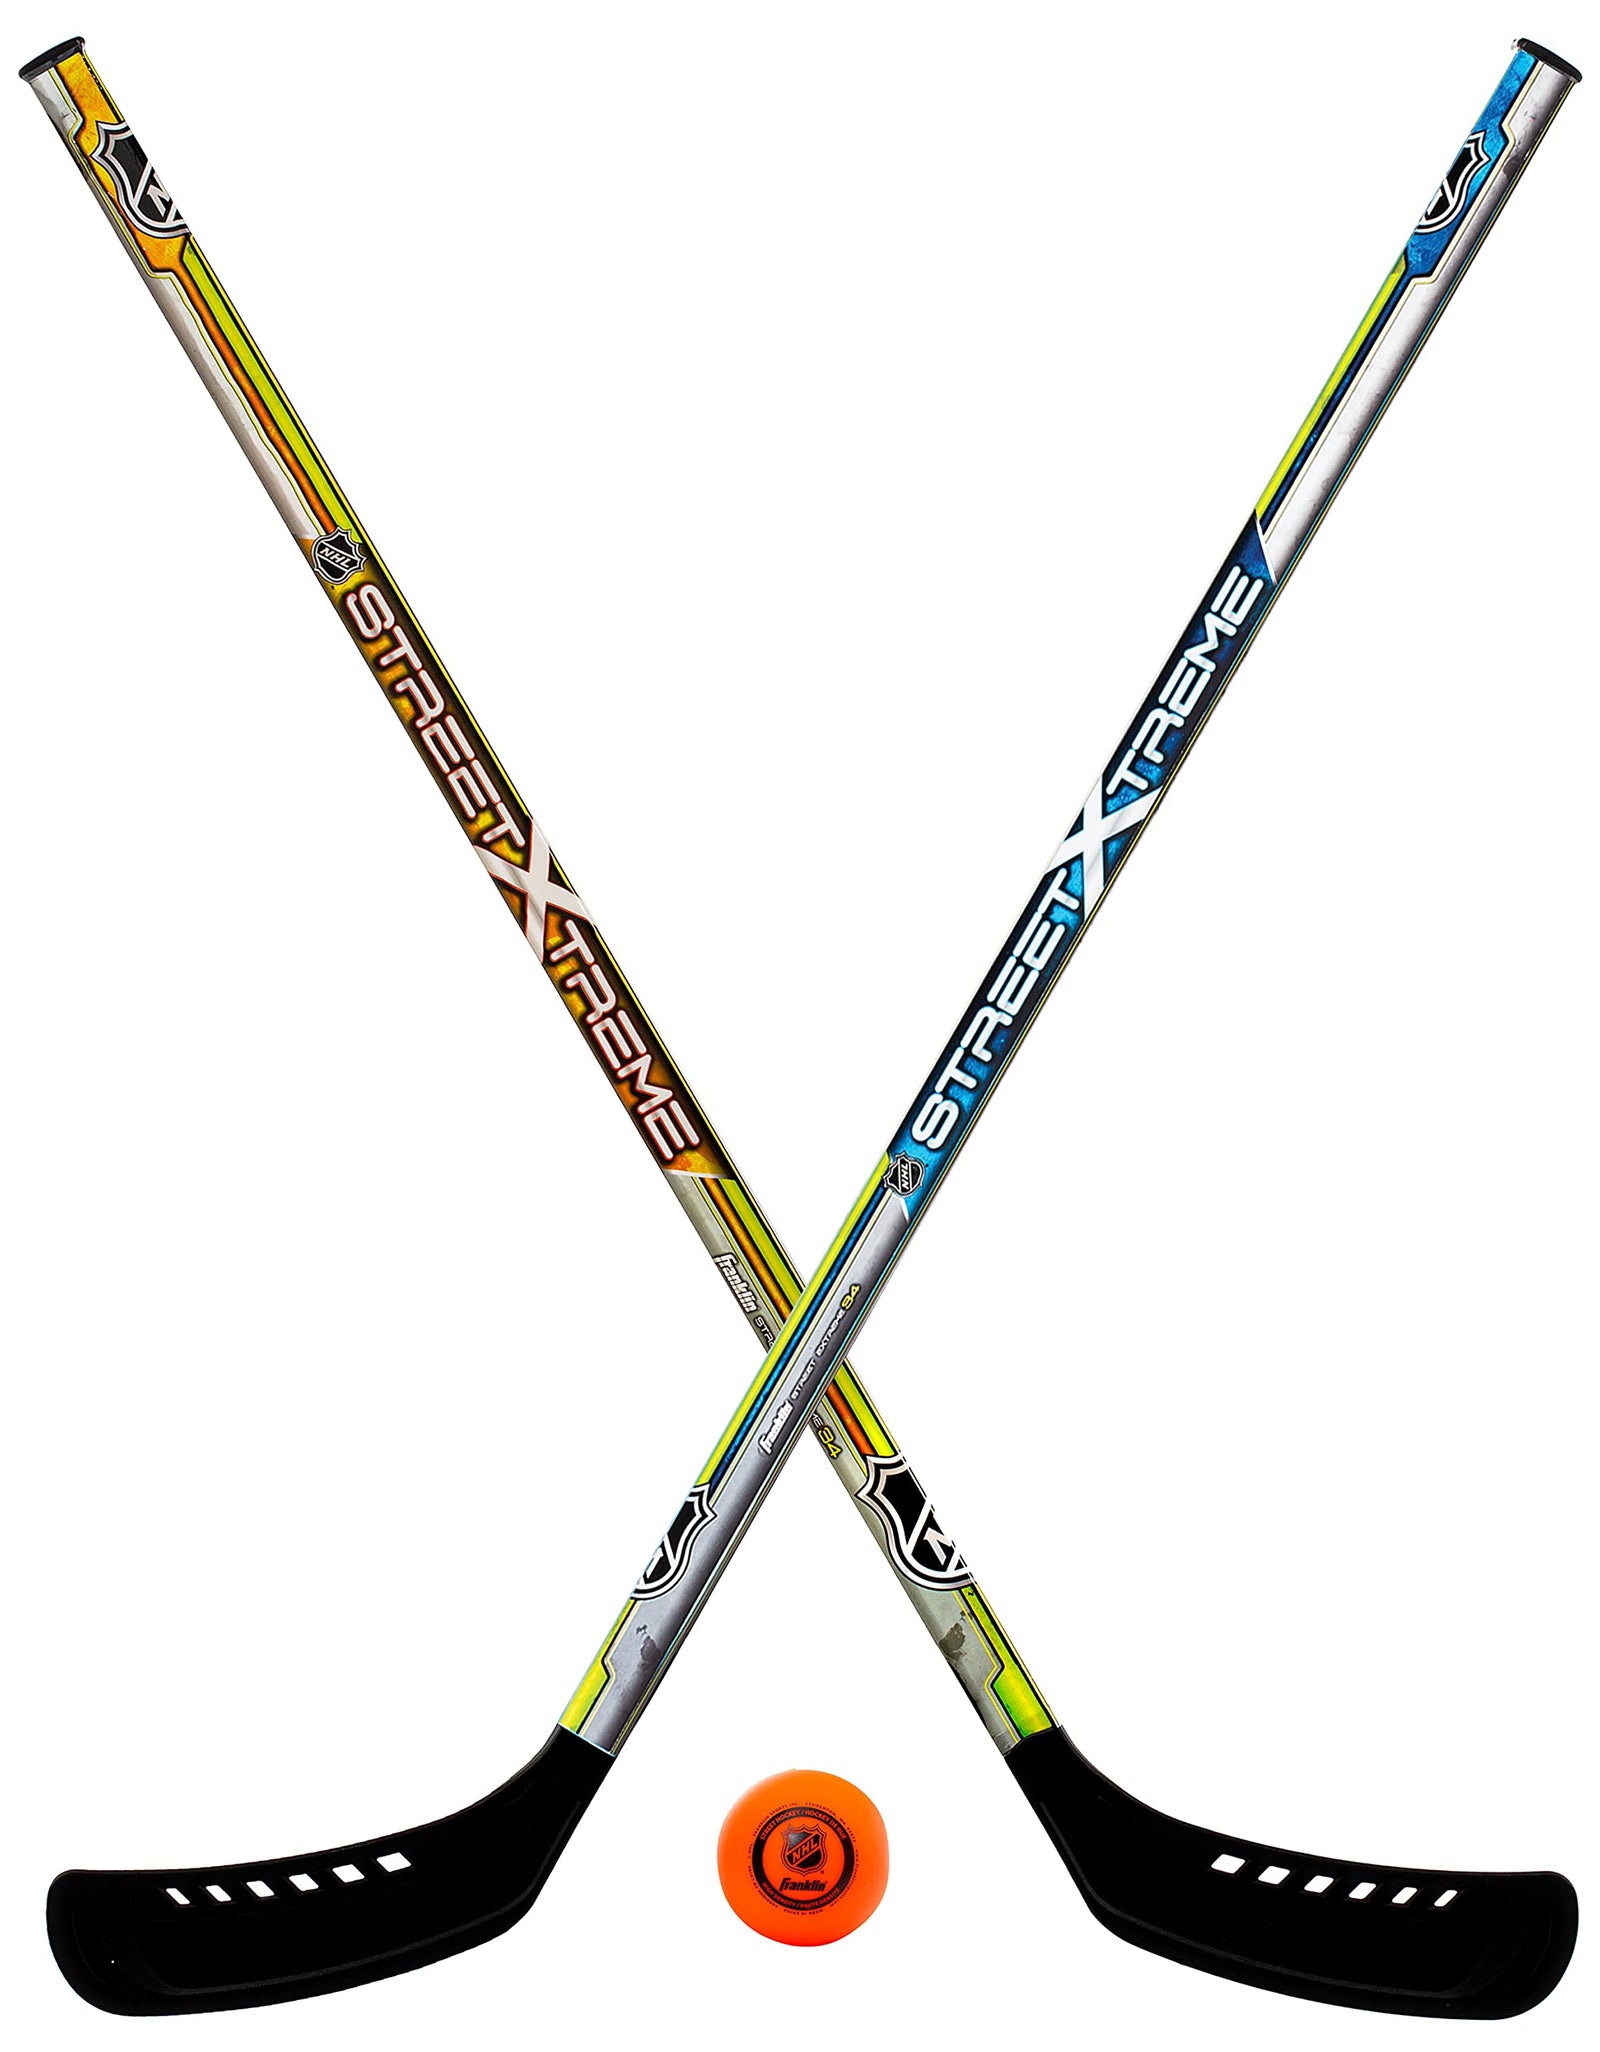 Franklin Sports Youth Street Hockey Set - Includes 2 Street Hockey Sticks and 1 Street Hockey Ball - Official NHL Licensed Product - Perfect Hockey Starter Set for Kids